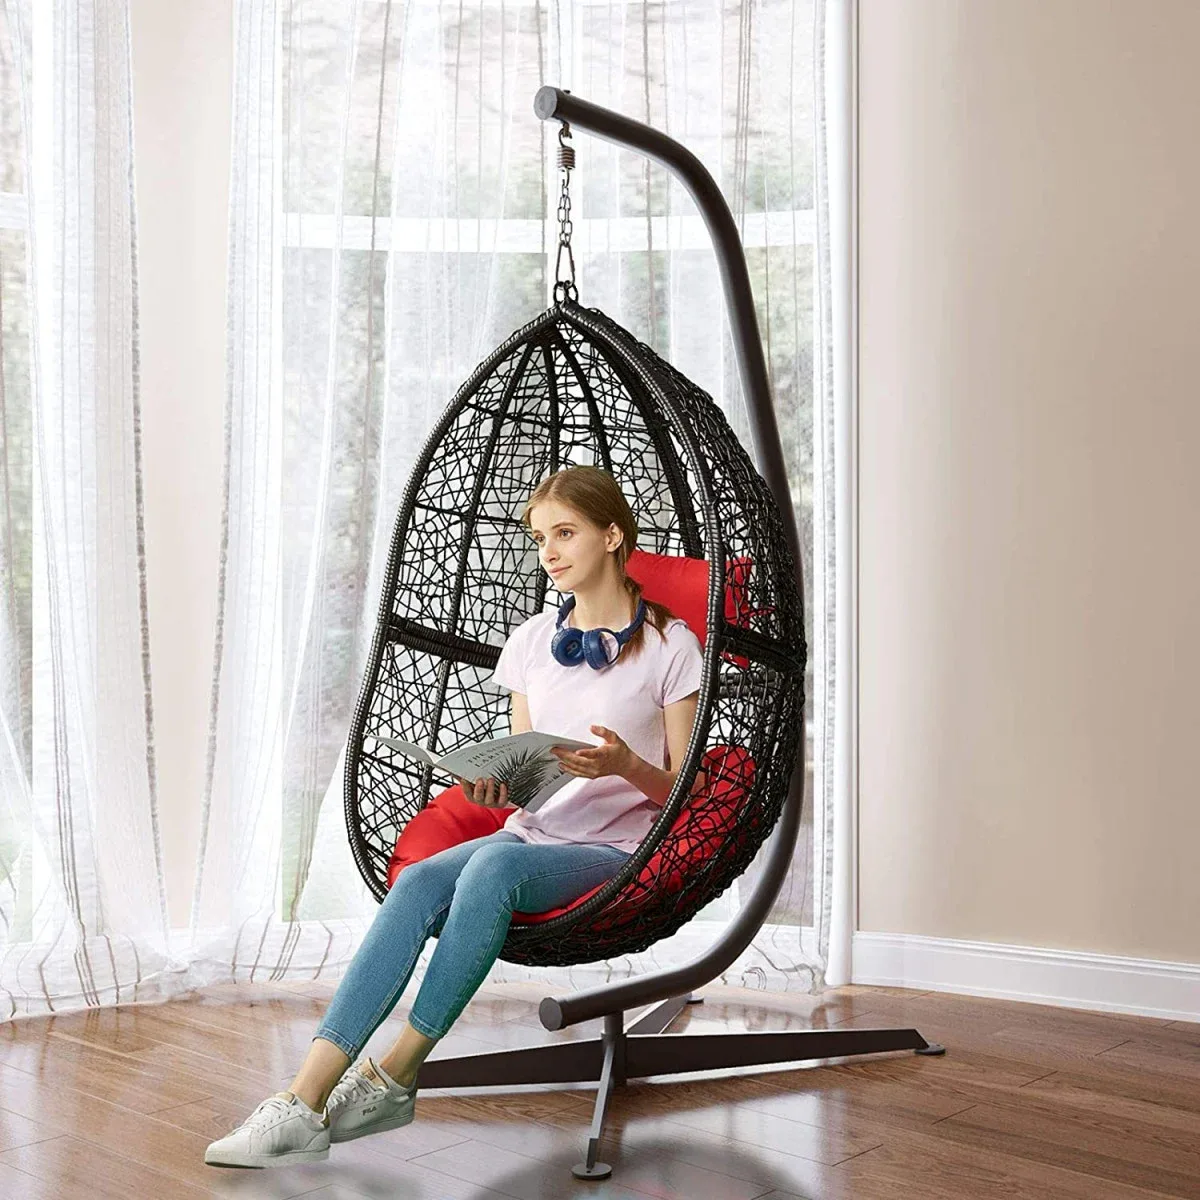 9 Cheap Egg Chairs To Decorate Your Home In 2021 - Travel Beauty Blog